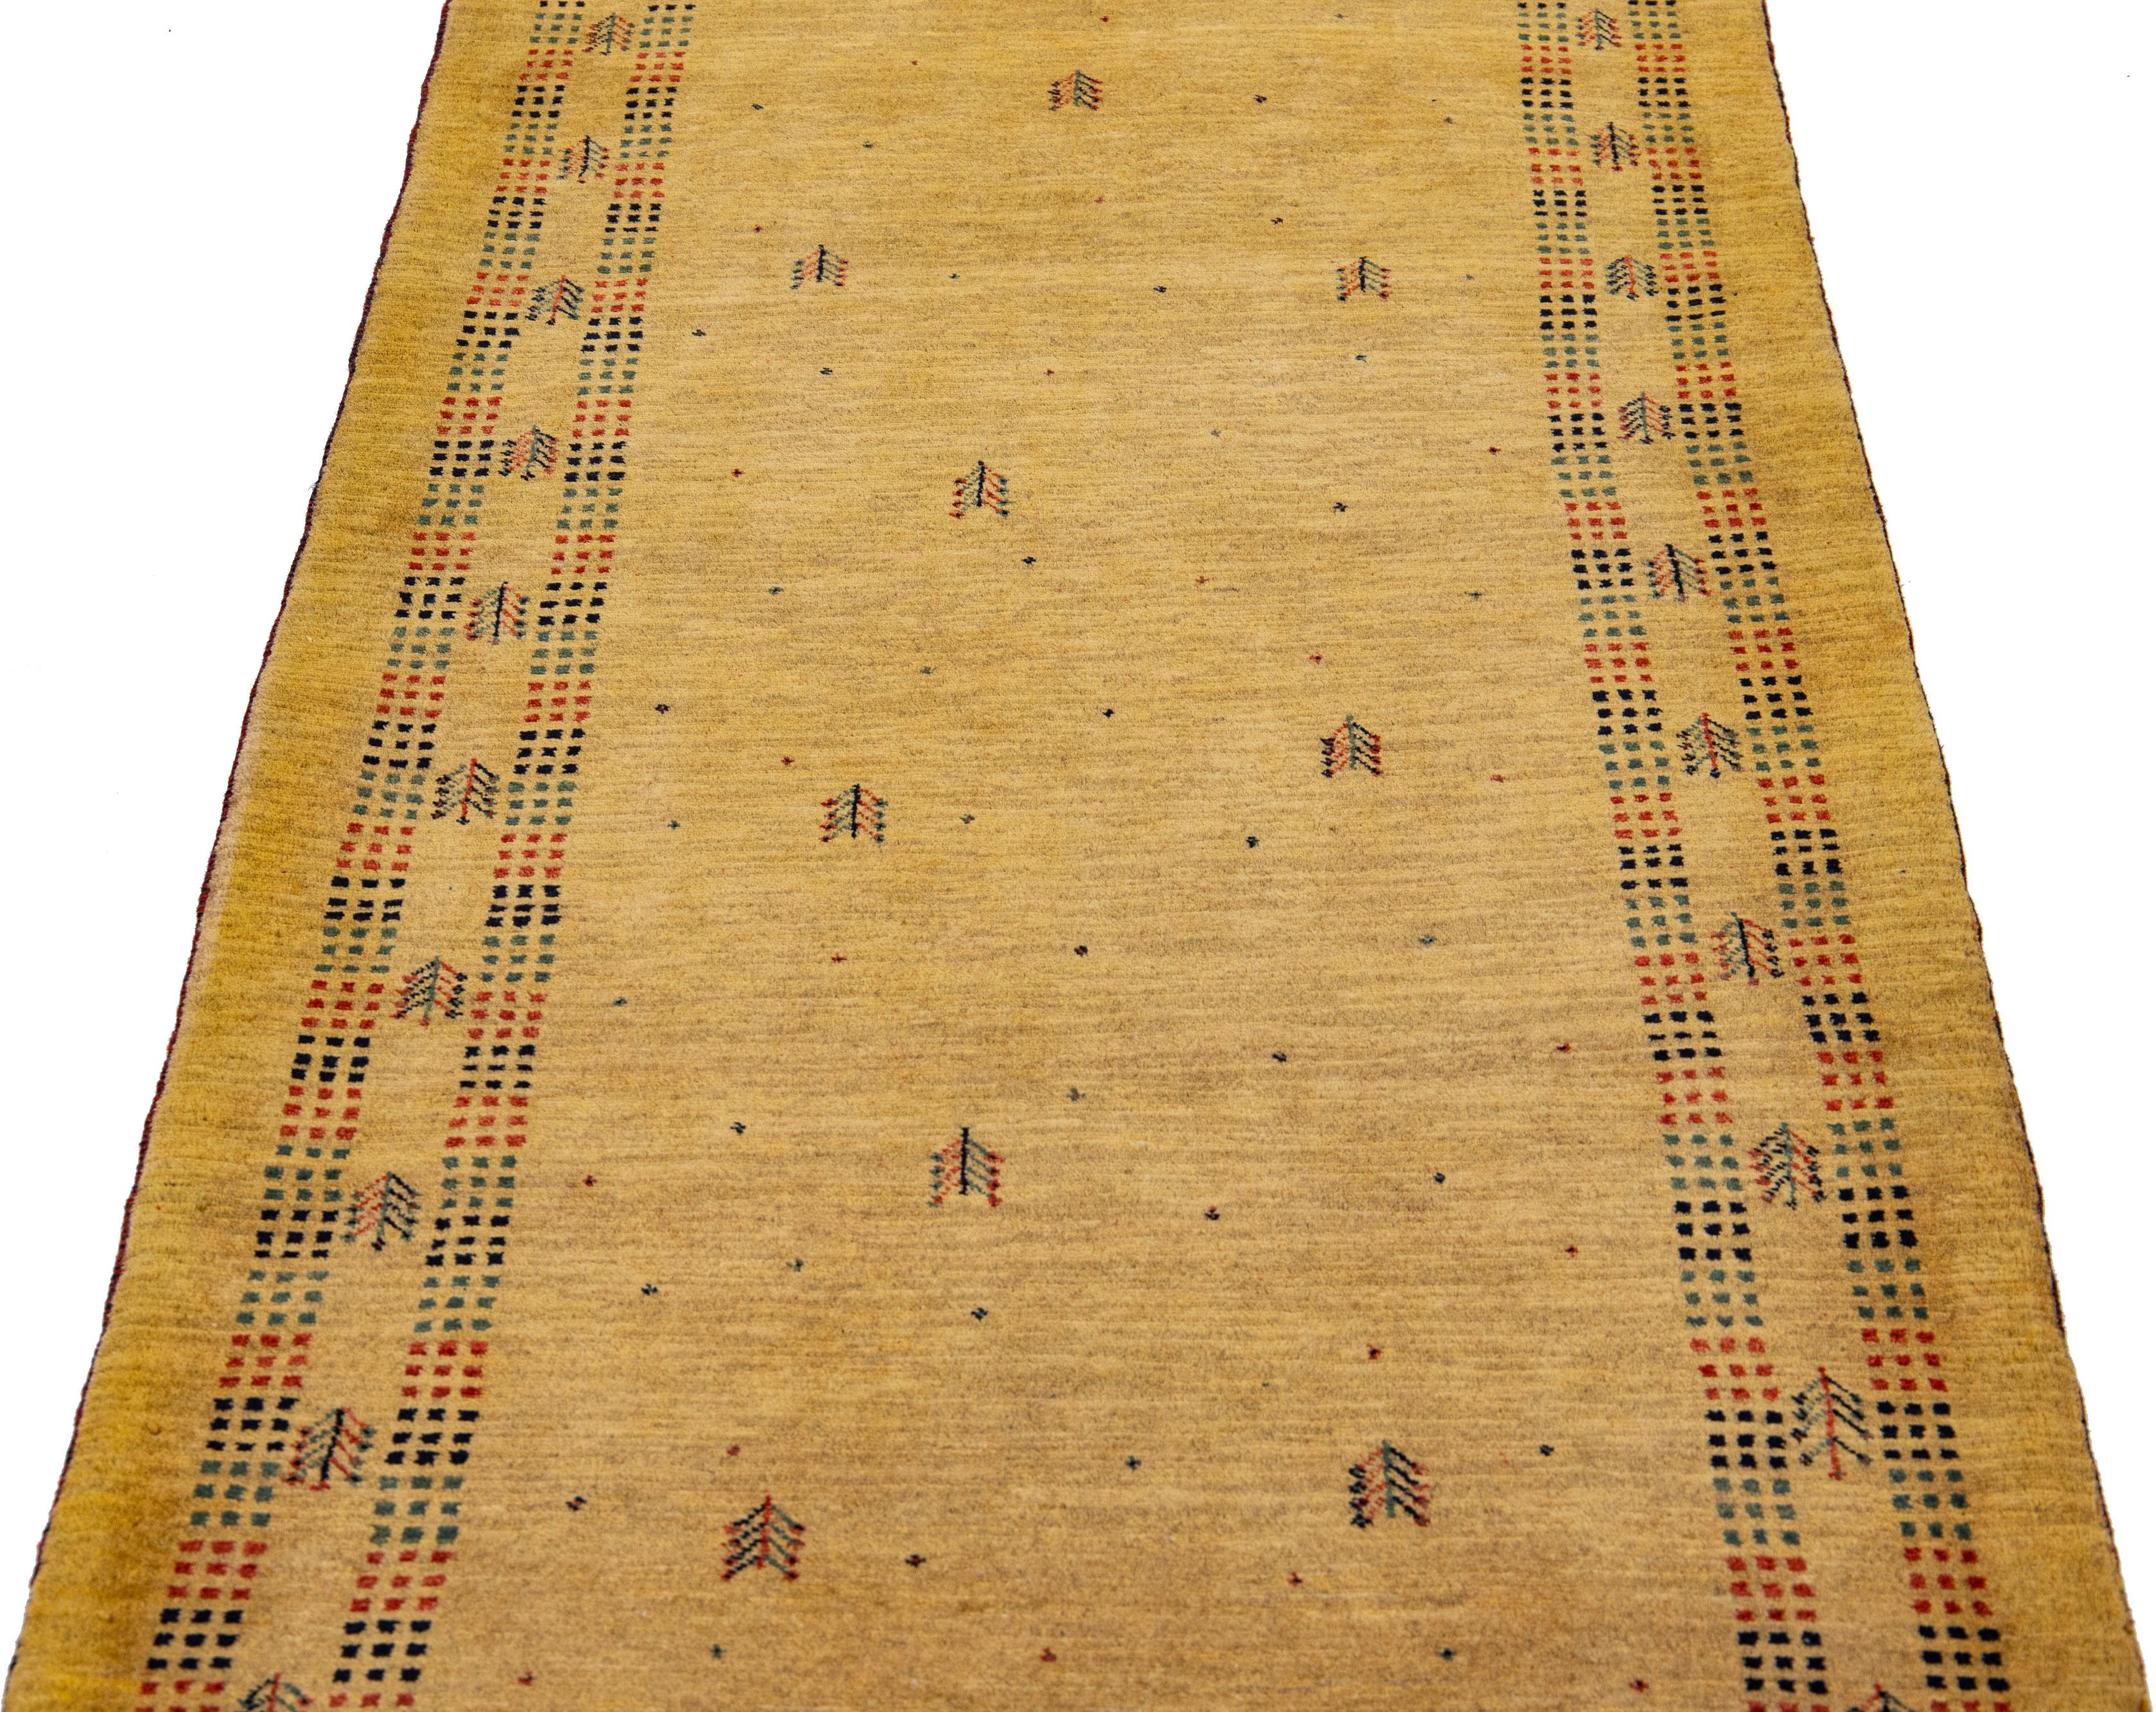 Beautiful modern Gabbeh-style hand-woven wool rug with a tan color field. This Persian rug has a gorgeous multicolor minimalist motif.

This rug measures: 2'10